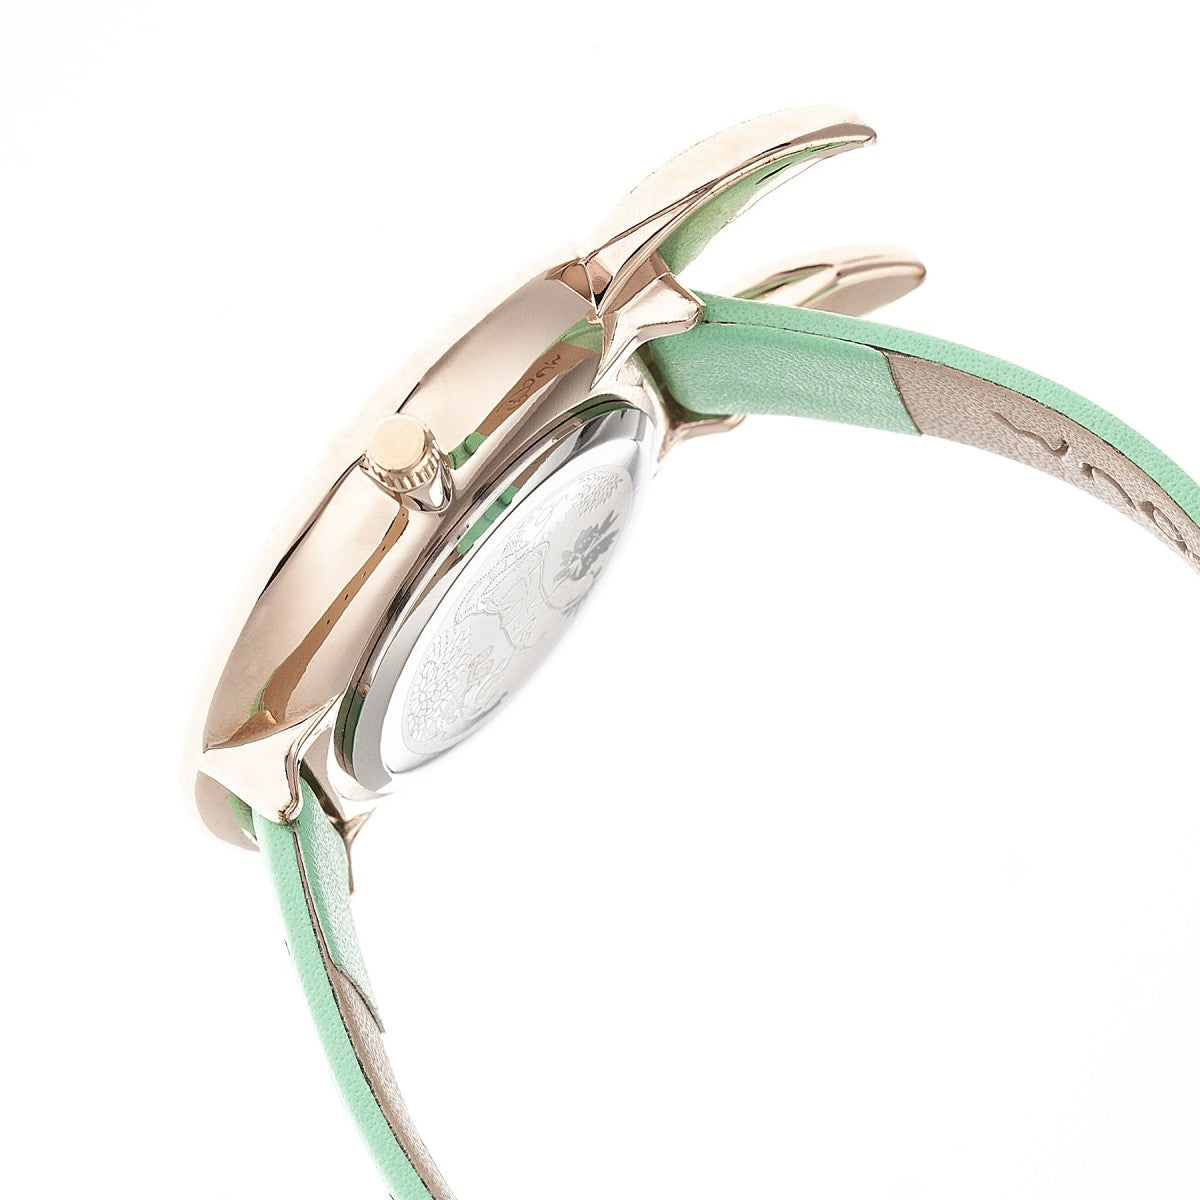 Boum Hotesse Bunny-Accent Leather-Band Watch - Rose Gold/Mint - BOUBM3505